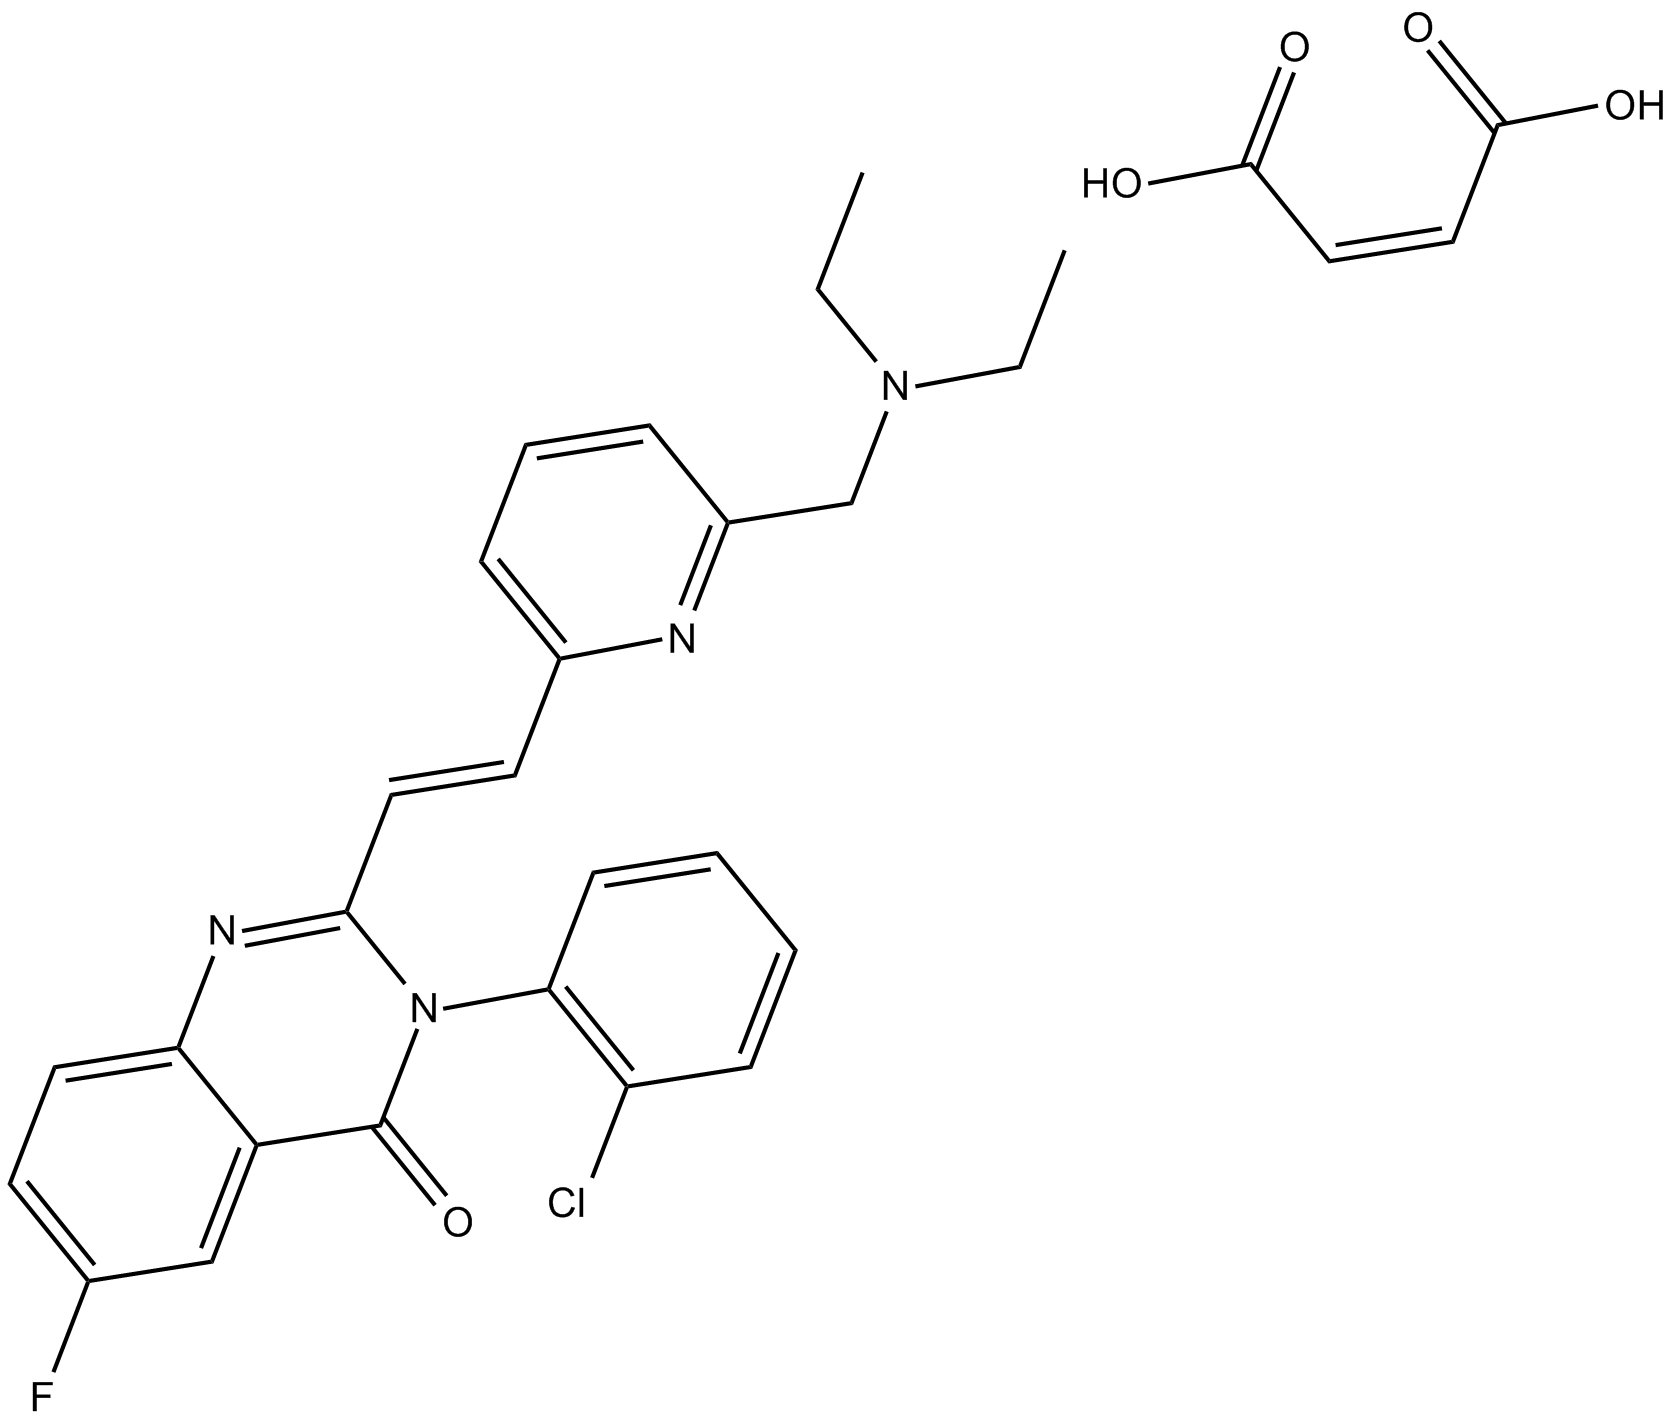 CP-465022 (maleate)  Chemical Structure